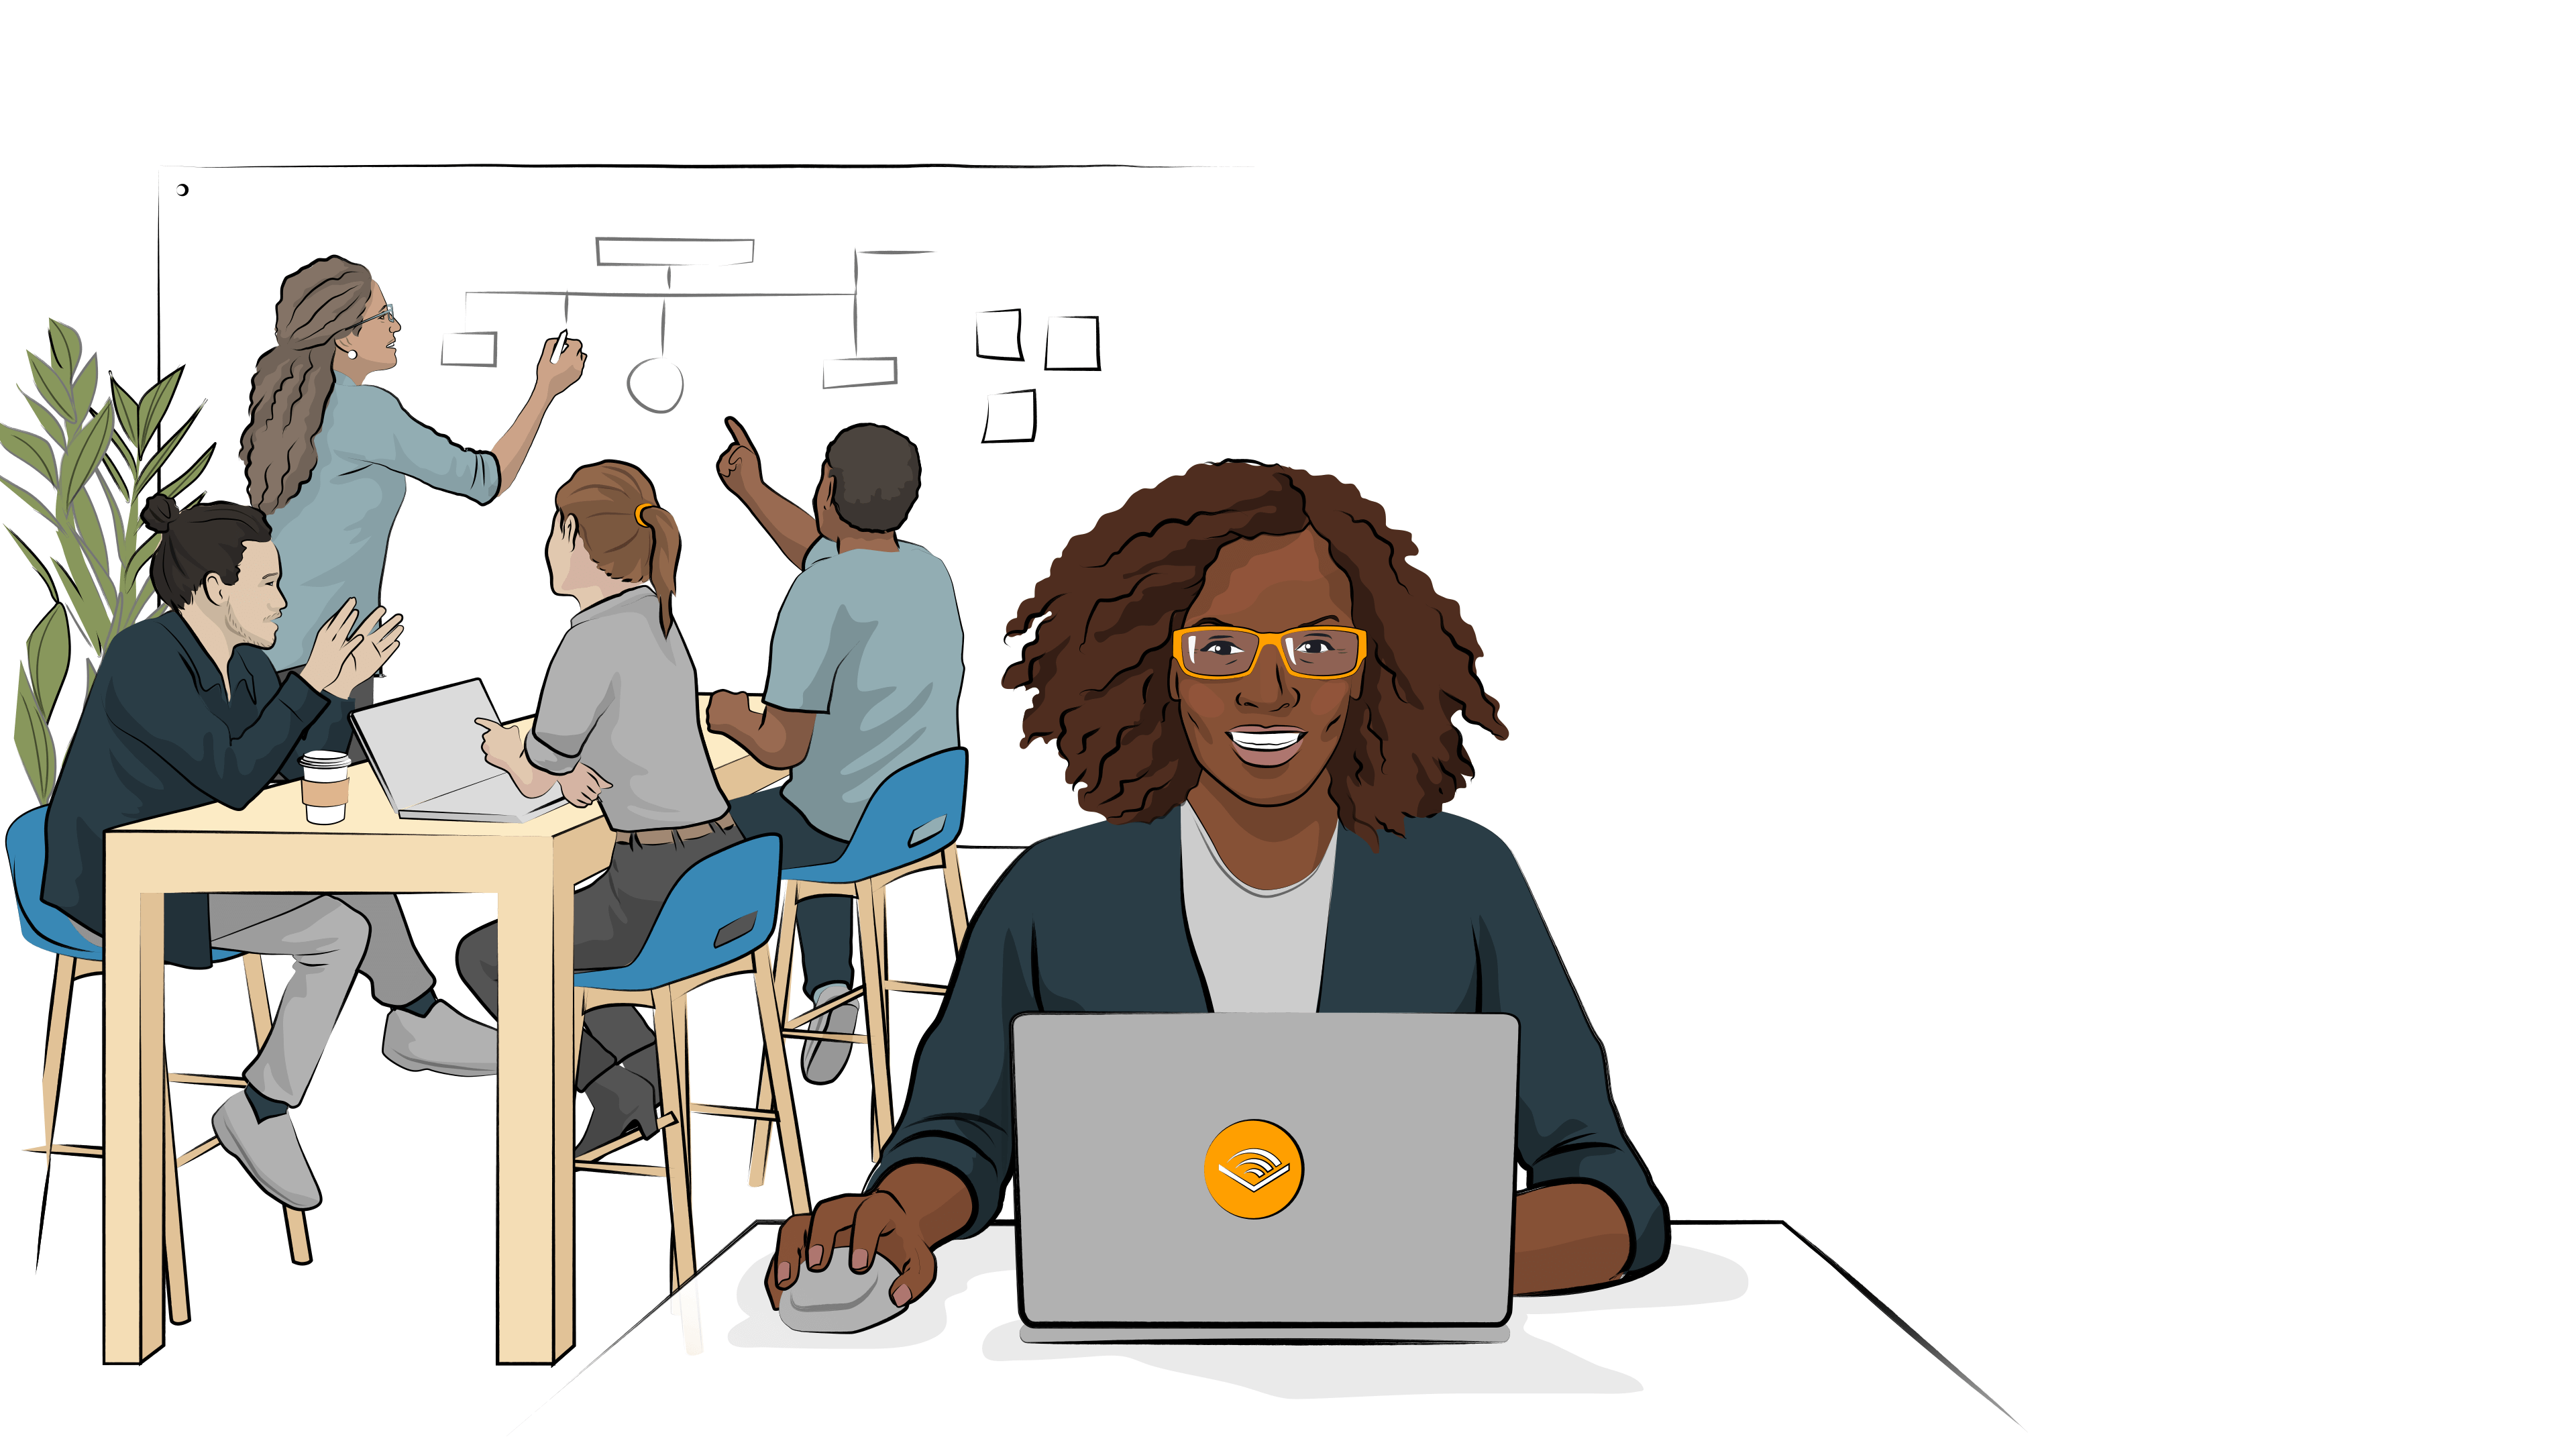 Cartoon image of a young woman working at her laptop